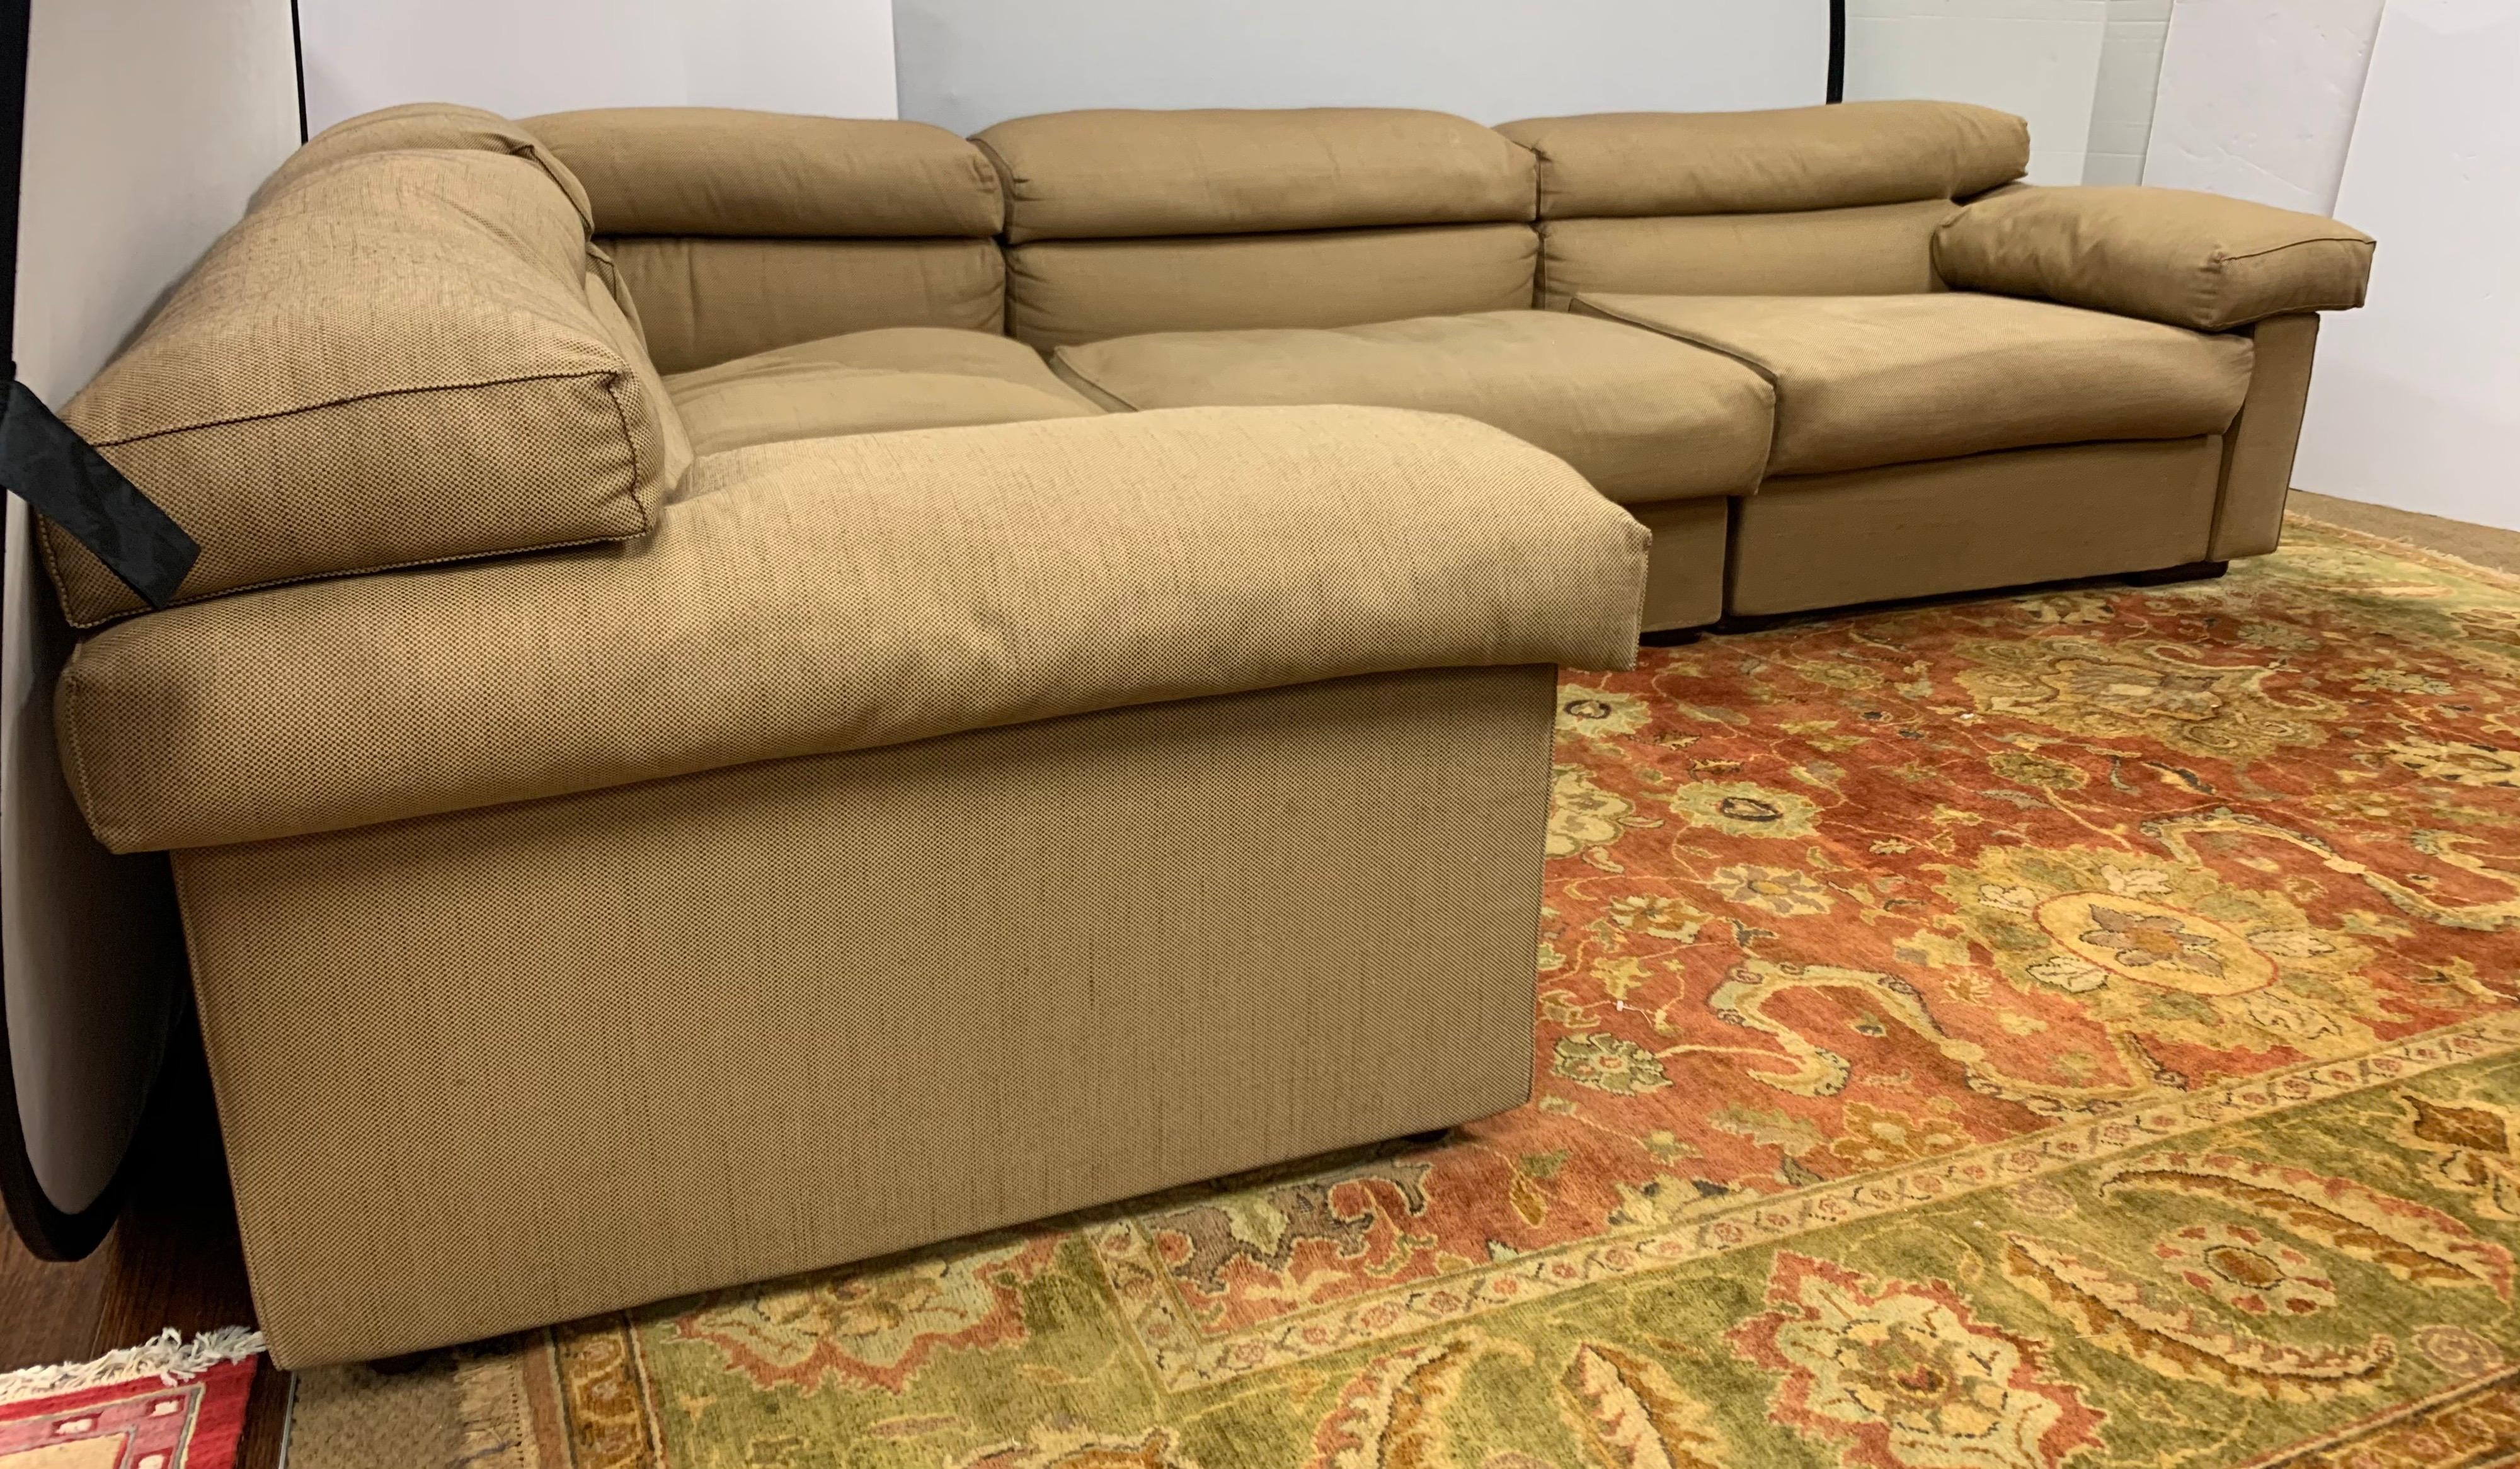 A magnificent signed four piece modular Erasmo sectional by B&B Italia. The Erasmo is one of the most coveted Afra & Tobia Scarpa designs in the world today. The fabric on this sectional is called 